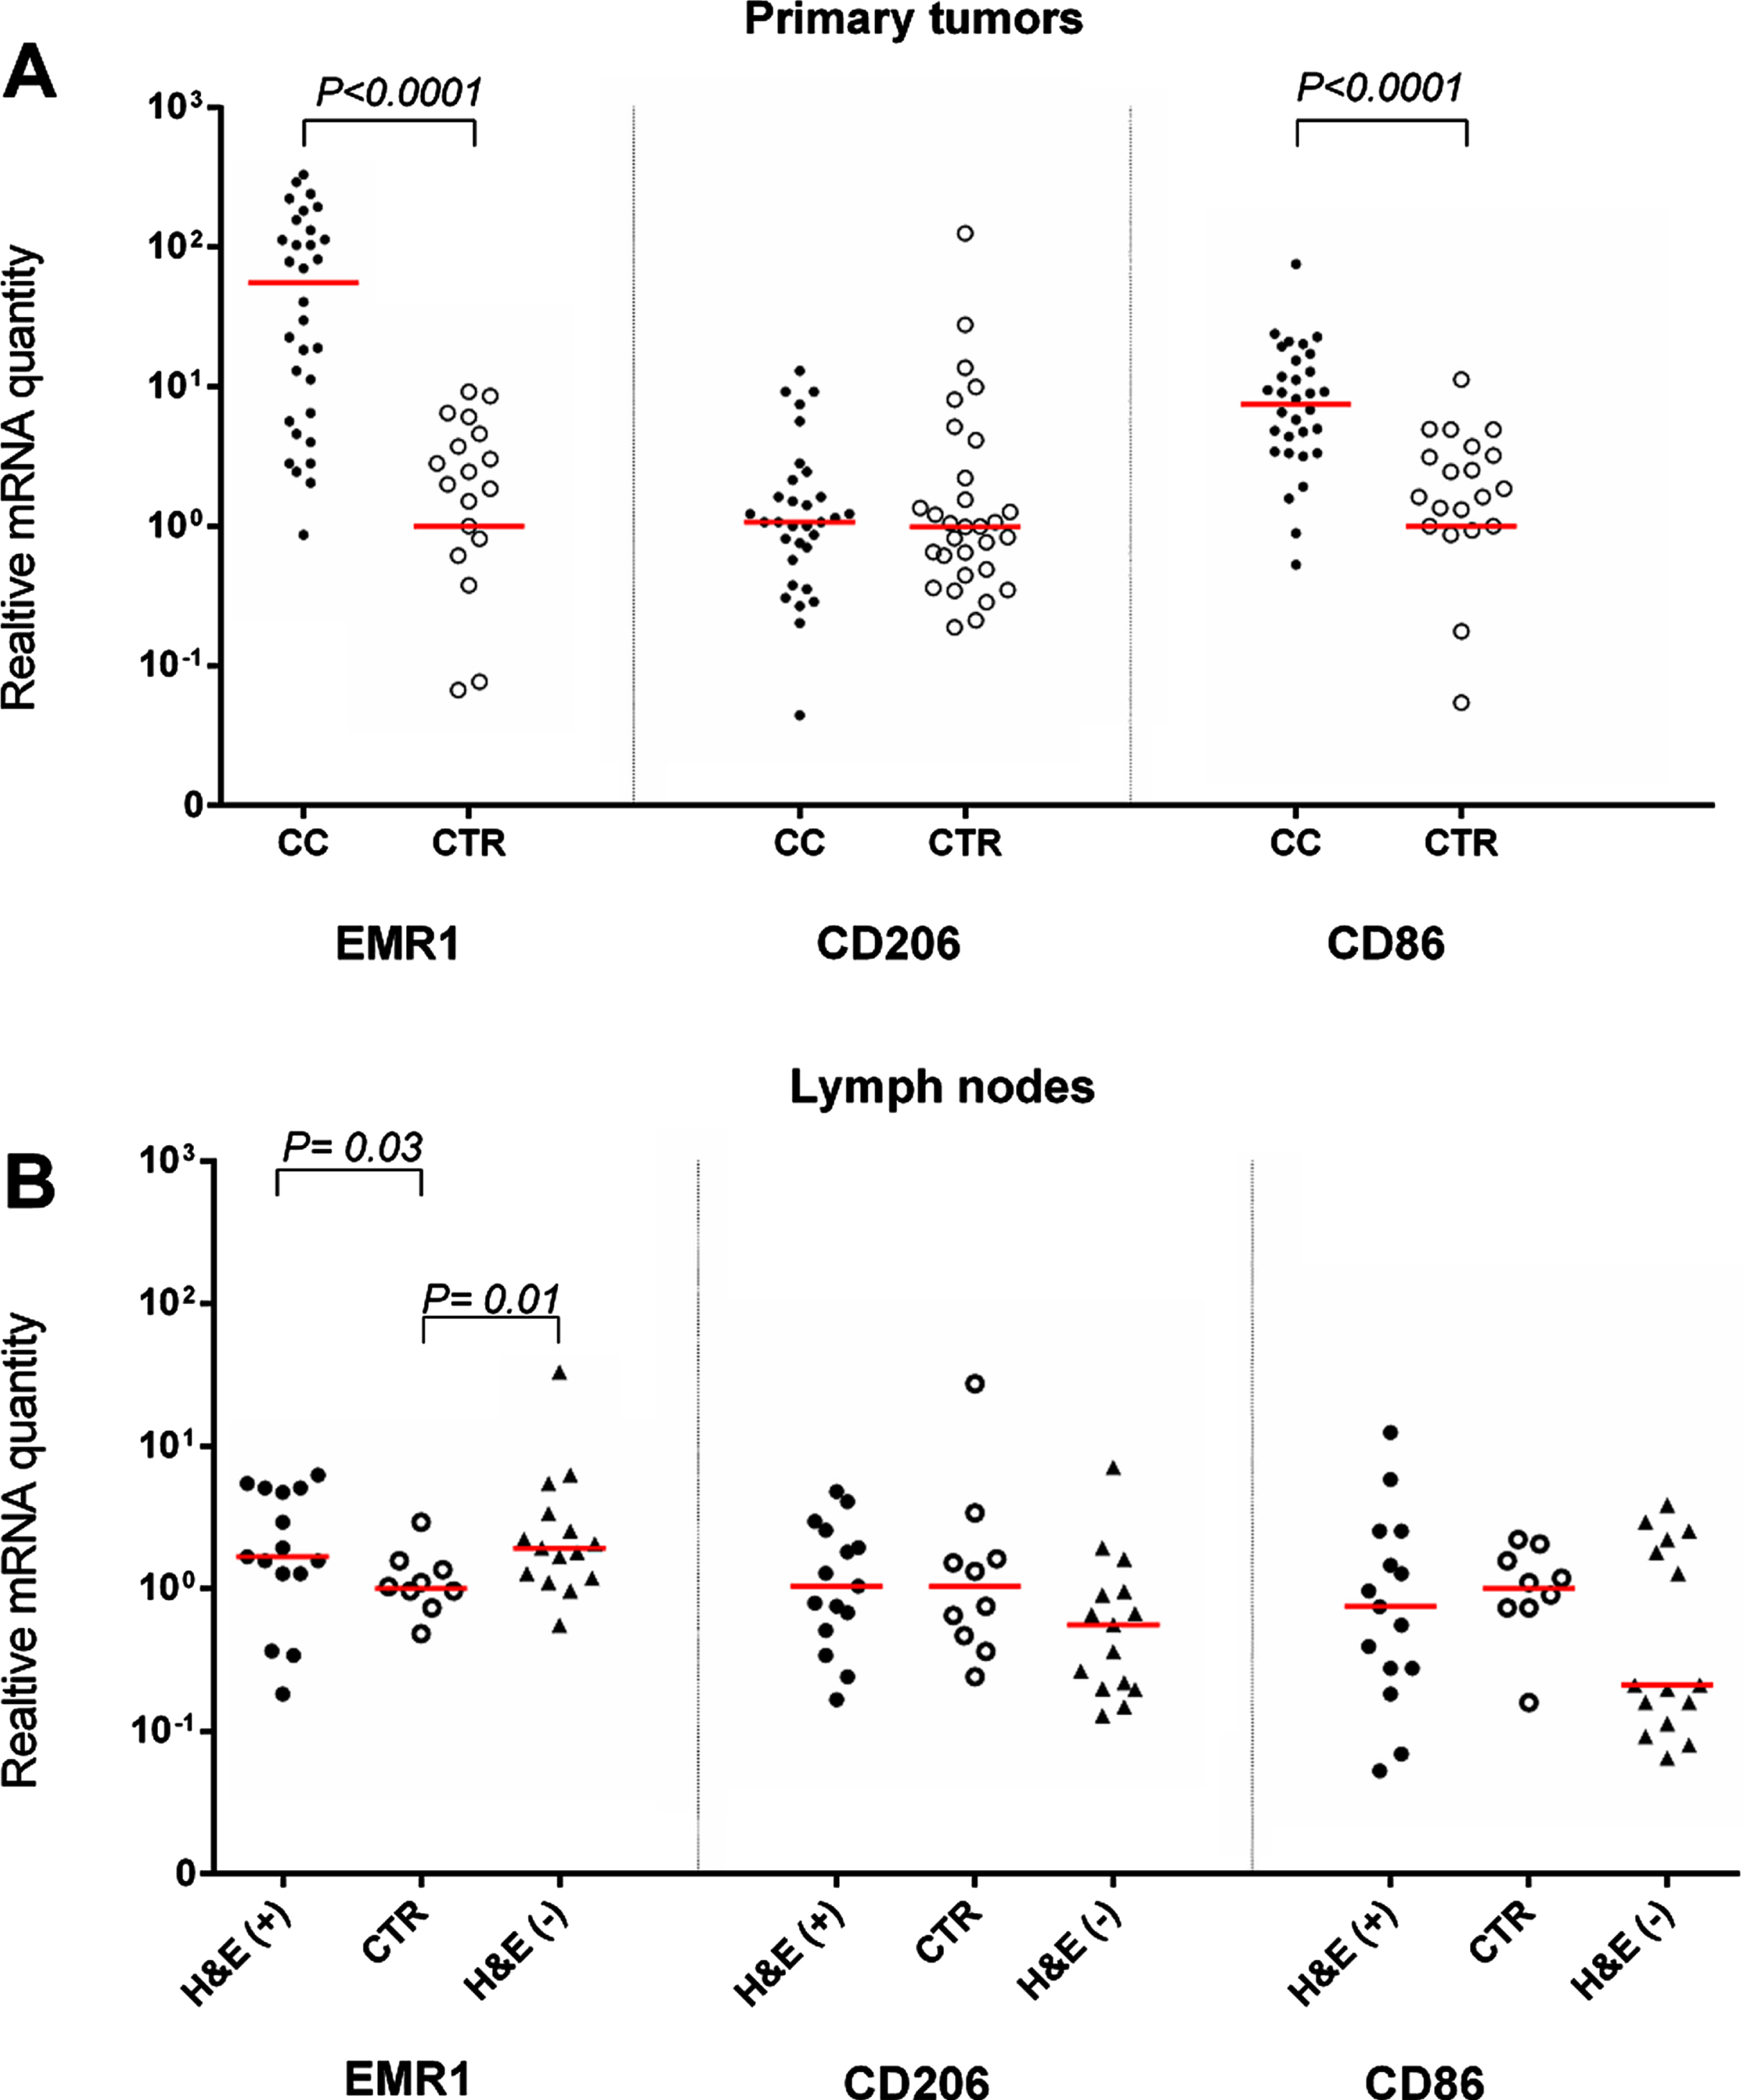 Levels of mRNA for EMR1, CD206 and CD86 in (A) primary tumor tissue of 32 CC patients (CC) compared to normal colon tissue (CTR; EMR1, n = 25; CD206 and CD86, n = 30) and (B) in metastatic lymph nodes of CC patients (H&E(+), n = 15), non-metastatic nodes of CC patients (H&E(–), n = 15) and nodes of control patients (CTR, n = 10). mRNA levels are given as relative quantity (RQ) calculated as described in the Materials and Methods section. Red horizontal lines indicate median values. P-values were calculated by two-tailed Mann-Whitney rank sum test.